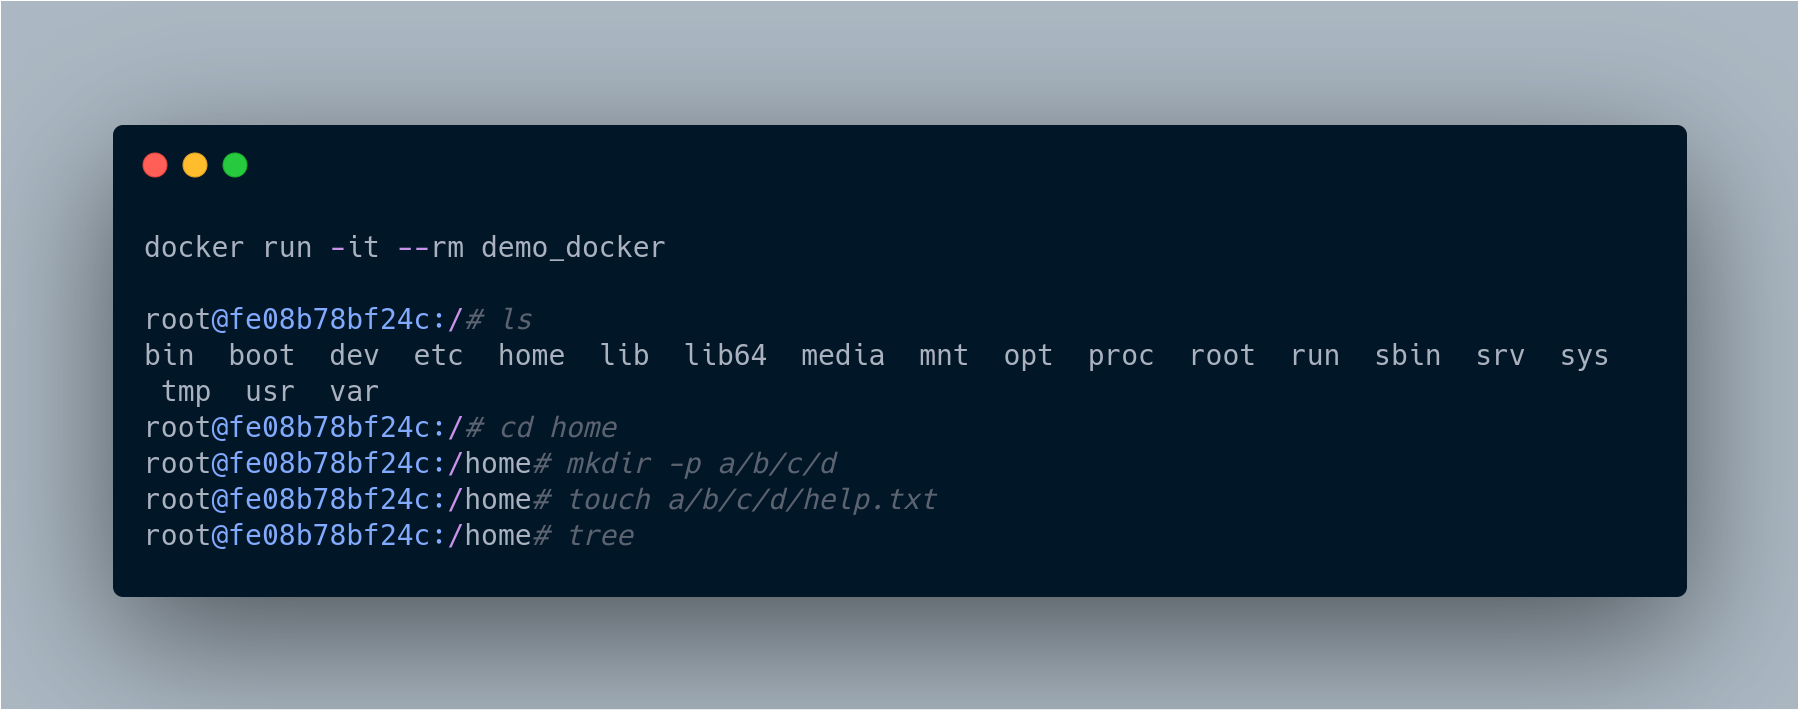 What Goes Into a Dockerfile? - Better Programming - Medium